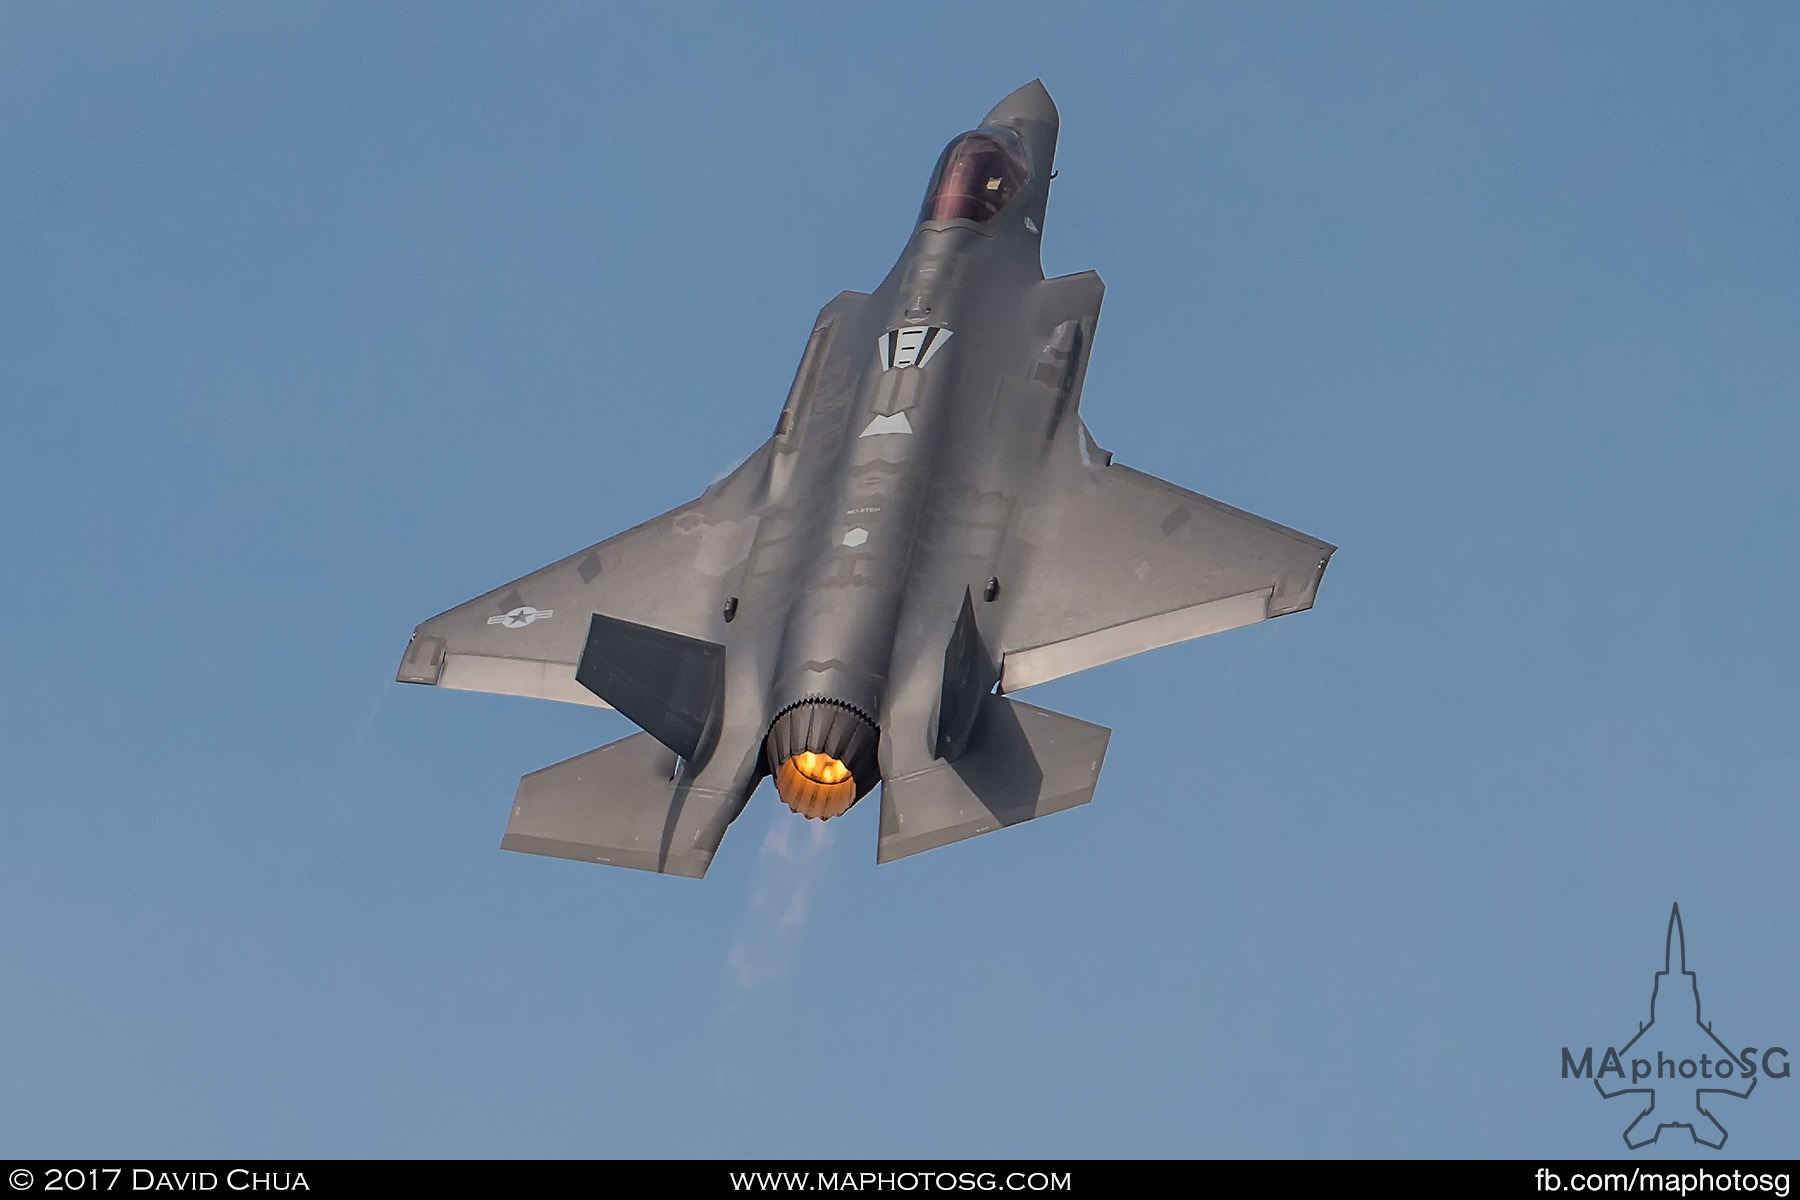 4. This is the first time that the Lockheed Martin F-35A performed an aerial demonstration display at any airshow. The demo was designed by Lockheed Martin and USAF to show off the capabilities of this 5th Generation Aircraft.